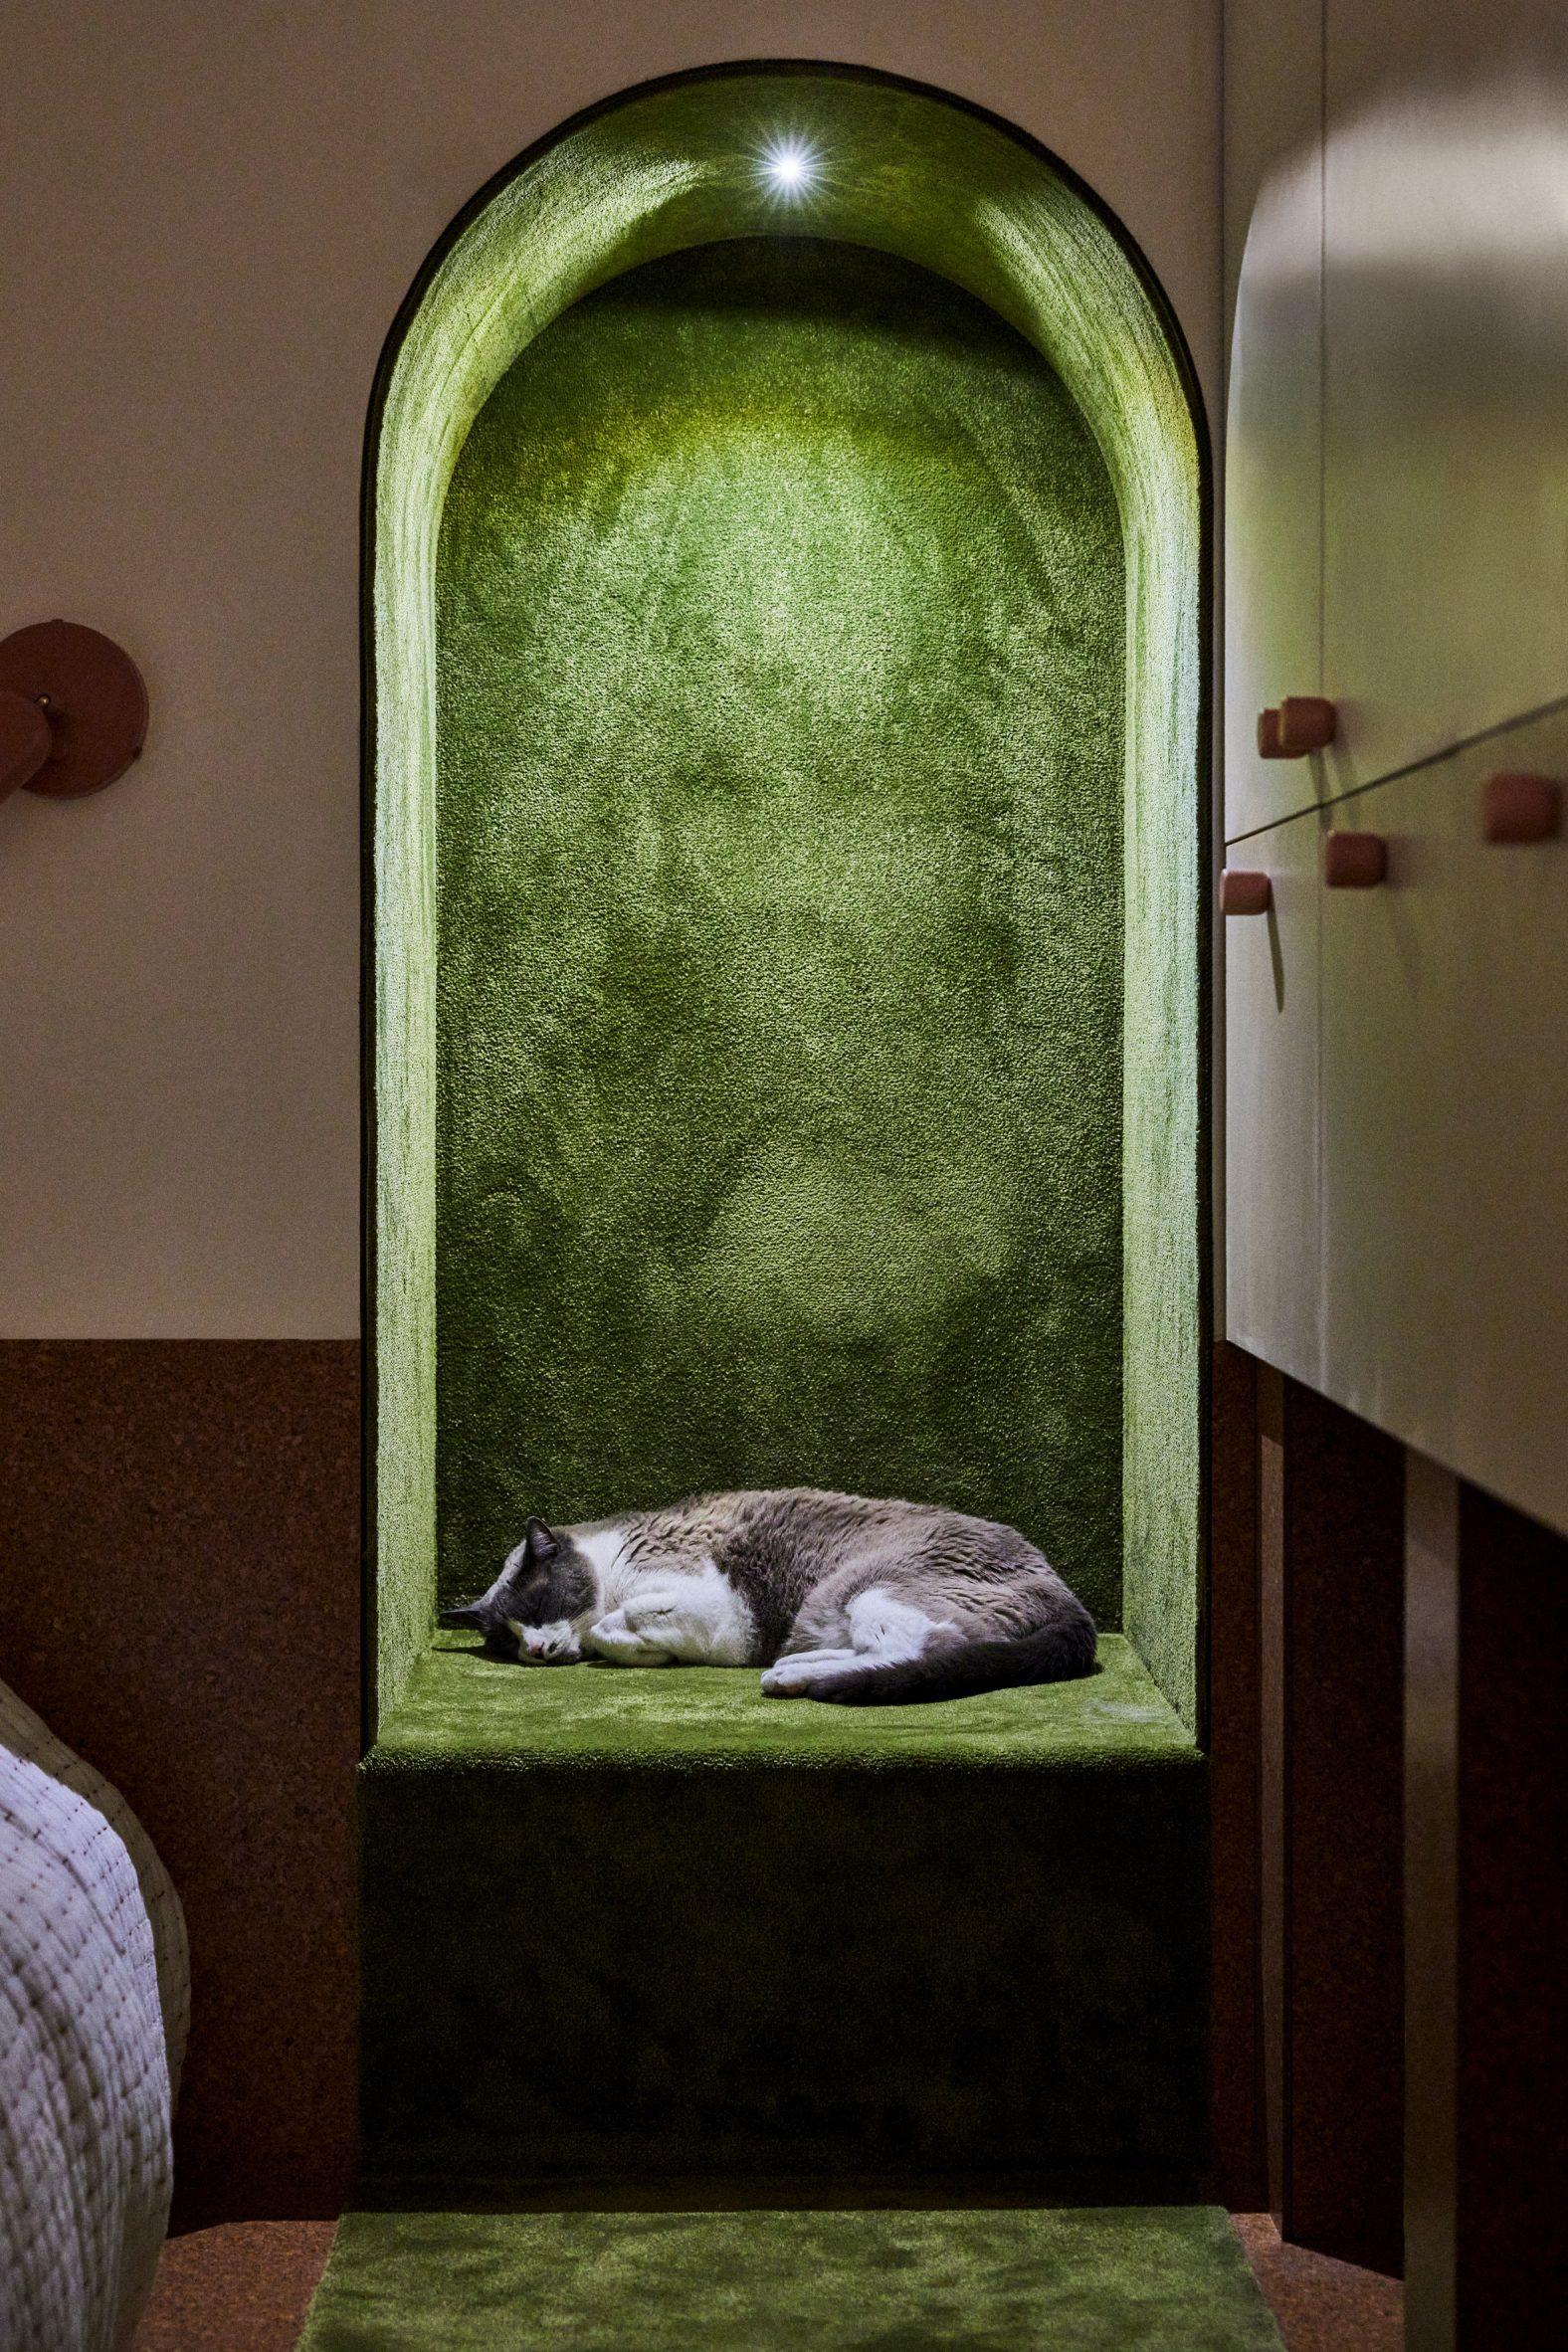 An arched niche lined with green carpet, with a cat napping inside